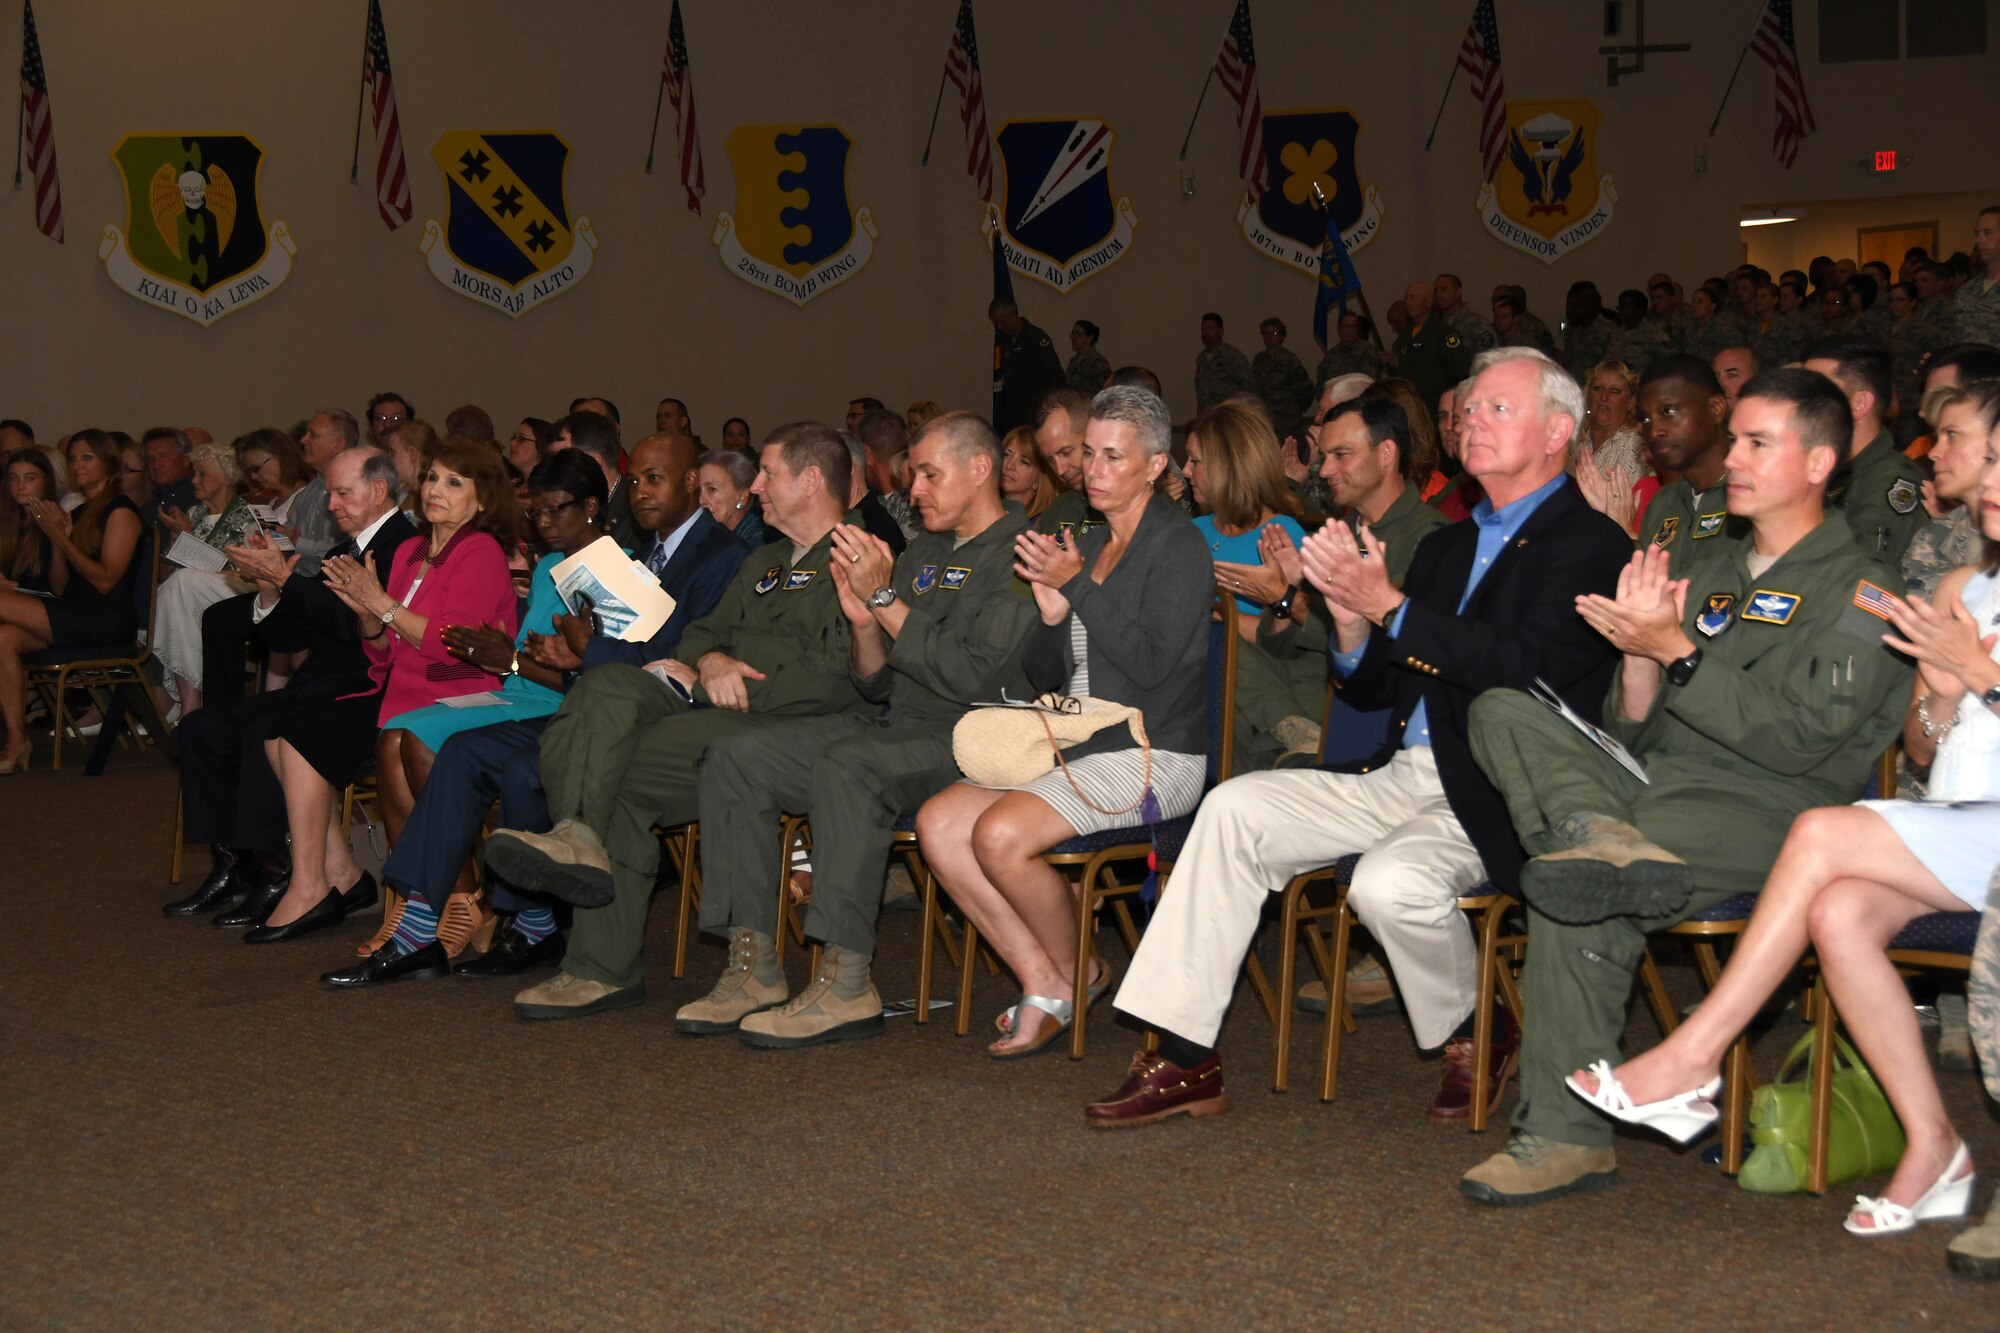 Distinguished guests and visitors applaud Colonel Robert VanHoy II as he assumes command of the 307th Bomb Wing July 8, 2017 at Barksdale Air Force Base, La. VanHoy was formally the commander for the 93rd Bomb Squadron and has several years of experience within the wing. (U.S. Air Force photo by Staff Sgt. Callie Ware/Released)